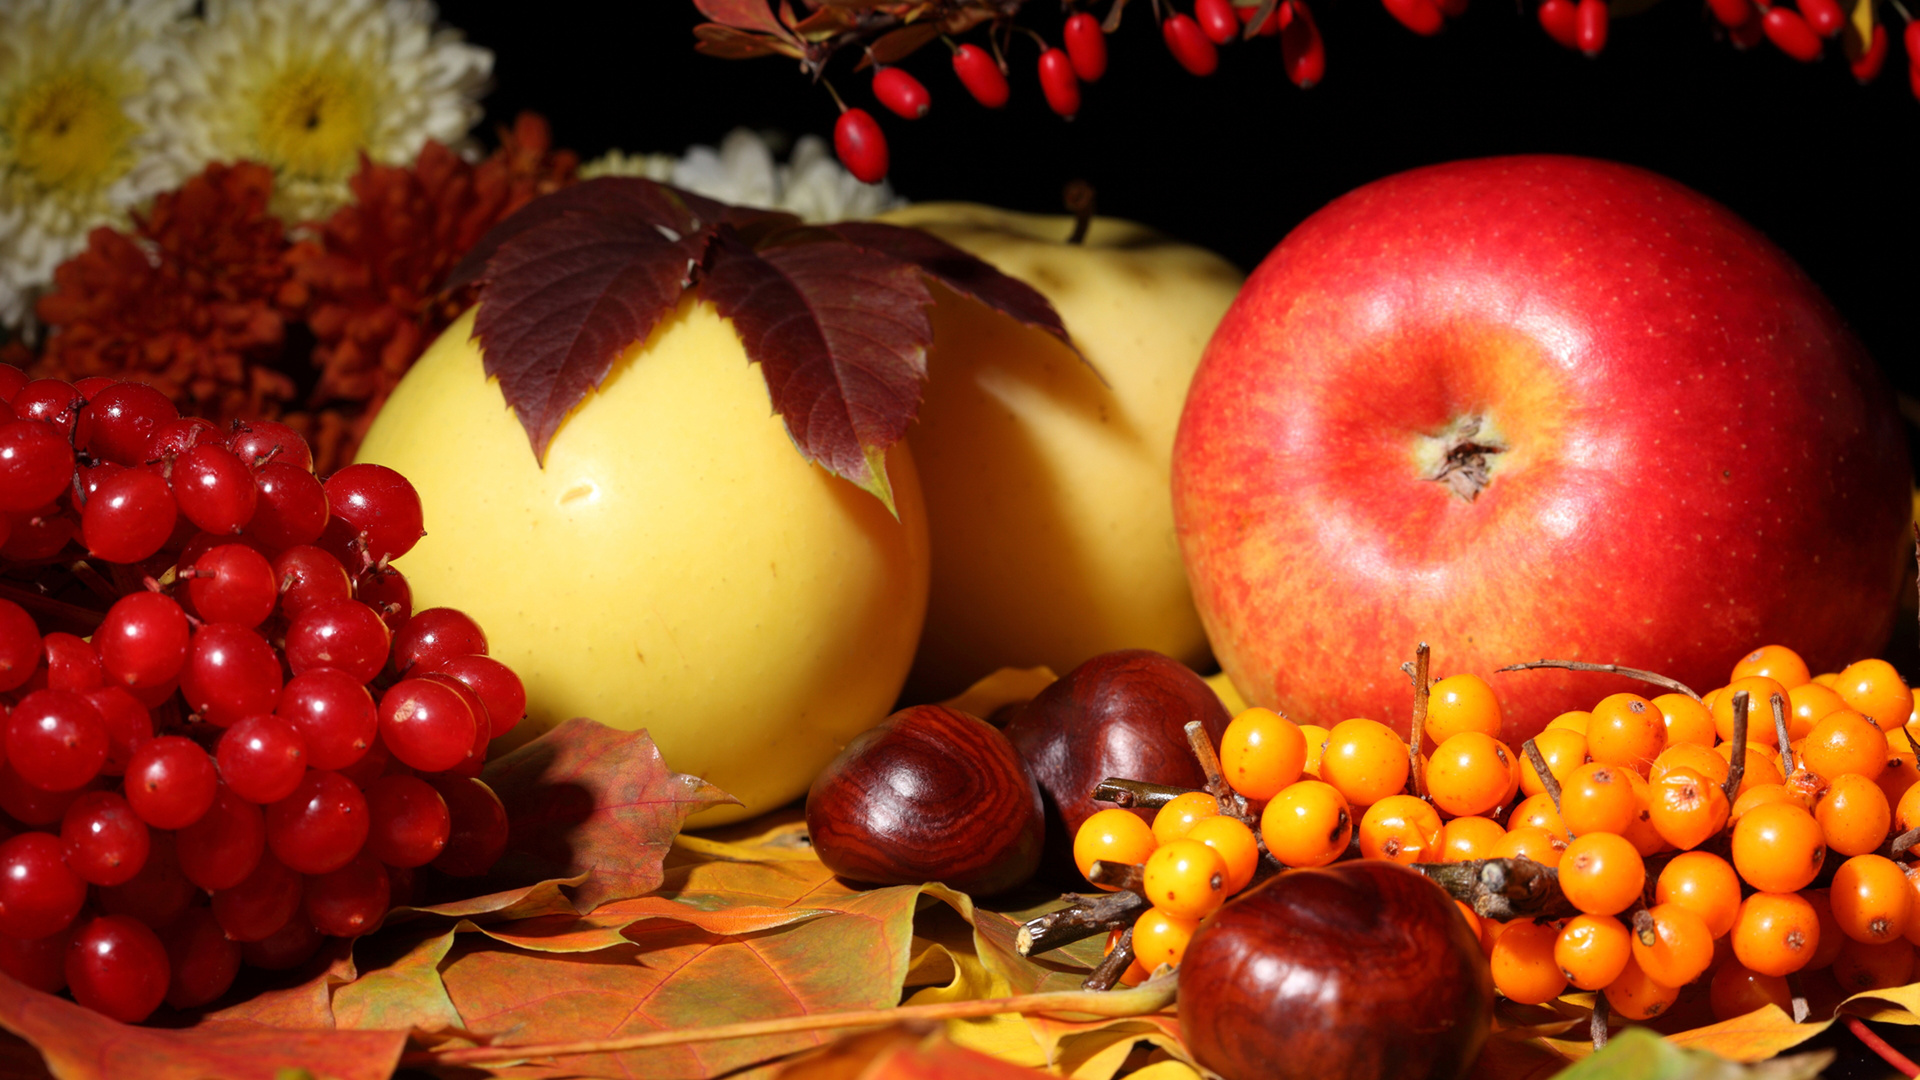 Still Life Apples Berries Berry Nuts Food Leaves Autumn Fall Wallpaper